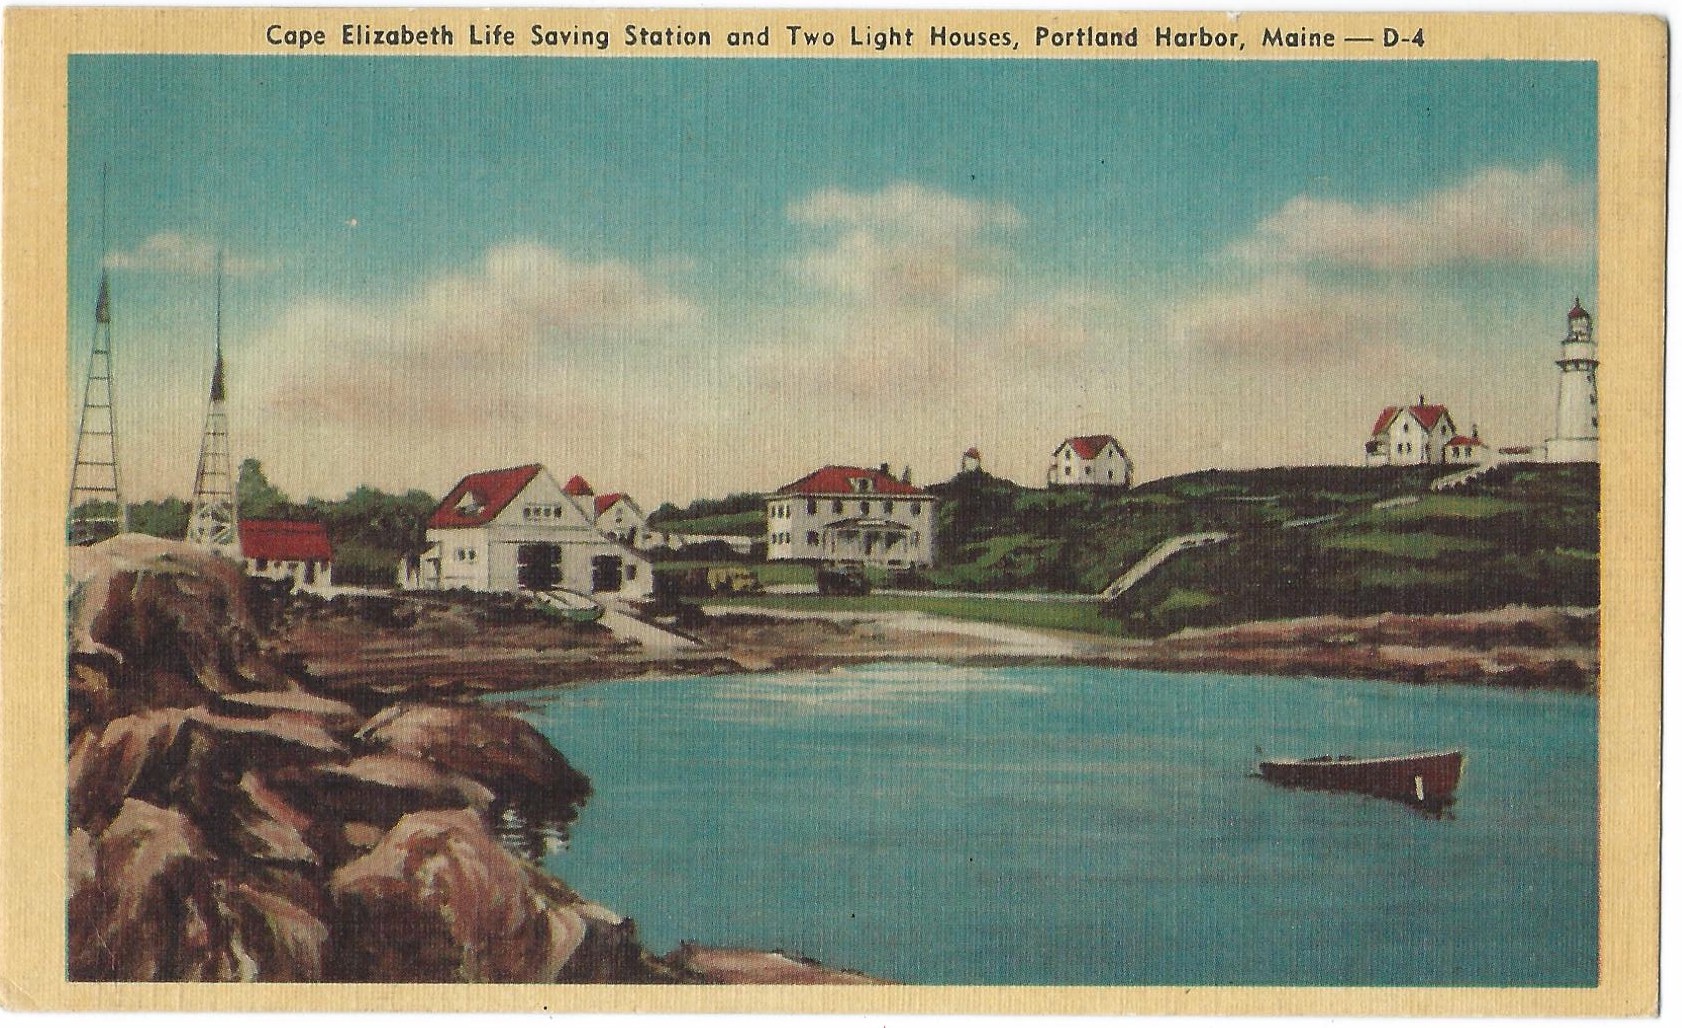 CAPE ELIZABETH LIFE SAVING STATION AND TWO LIGHT HOUSES D-4